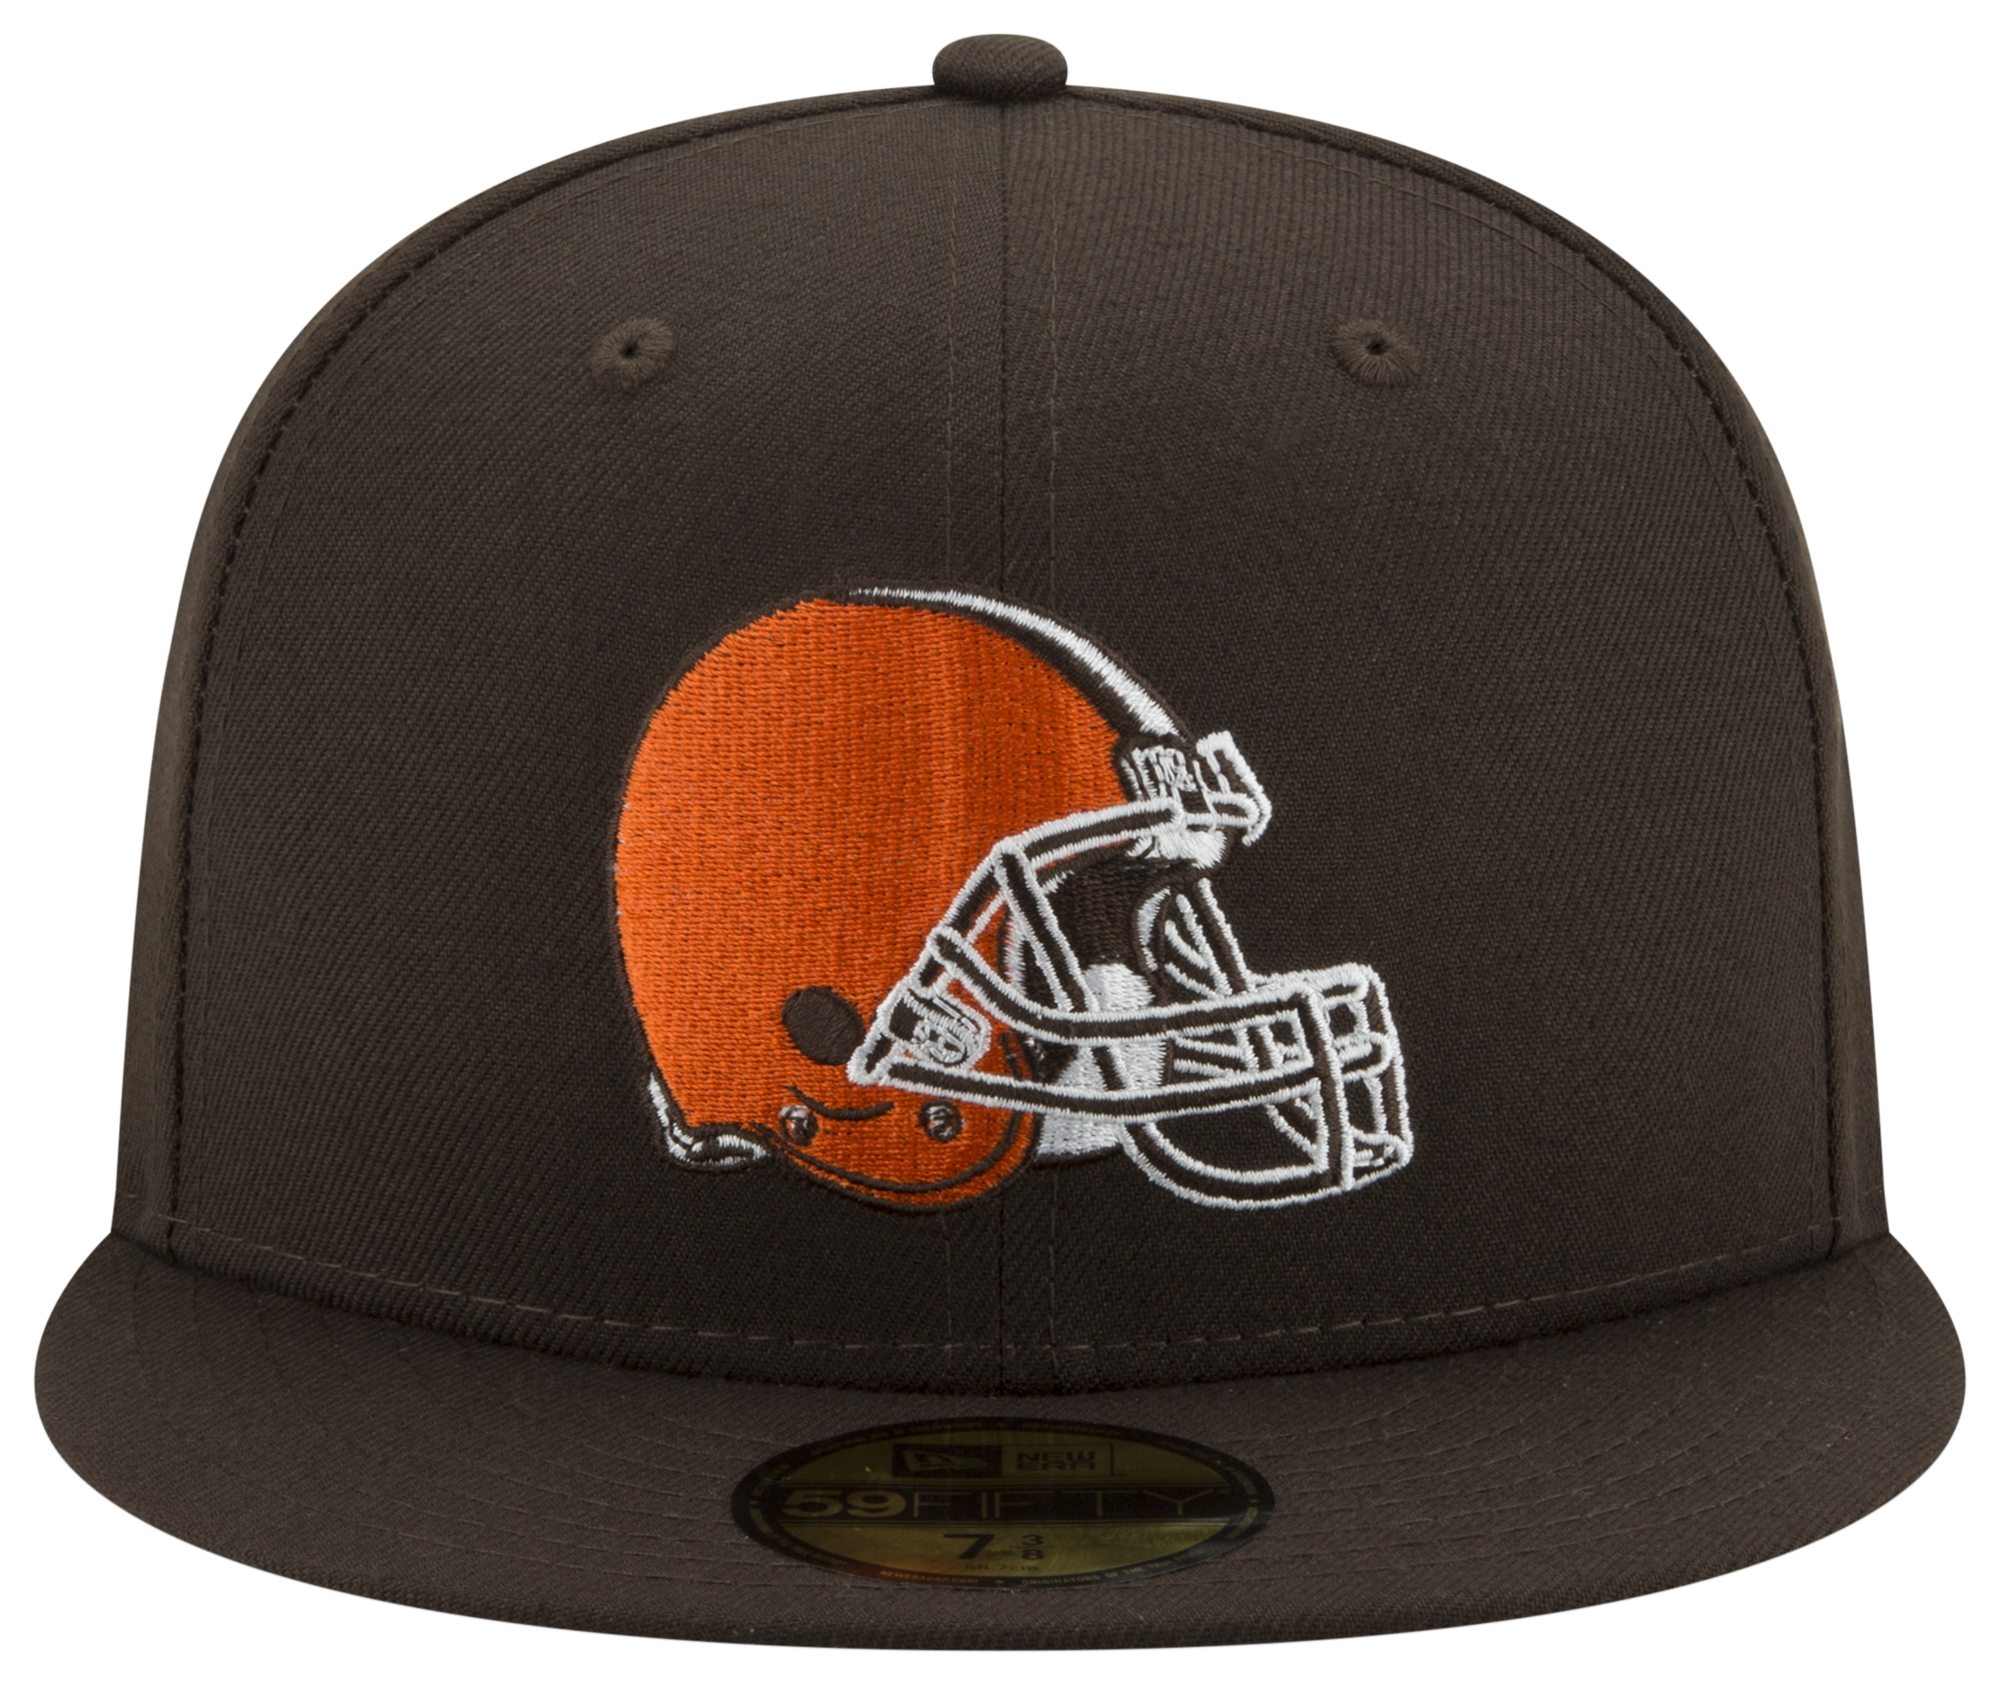 New Era Browns 5950 T/C Fitted Cap